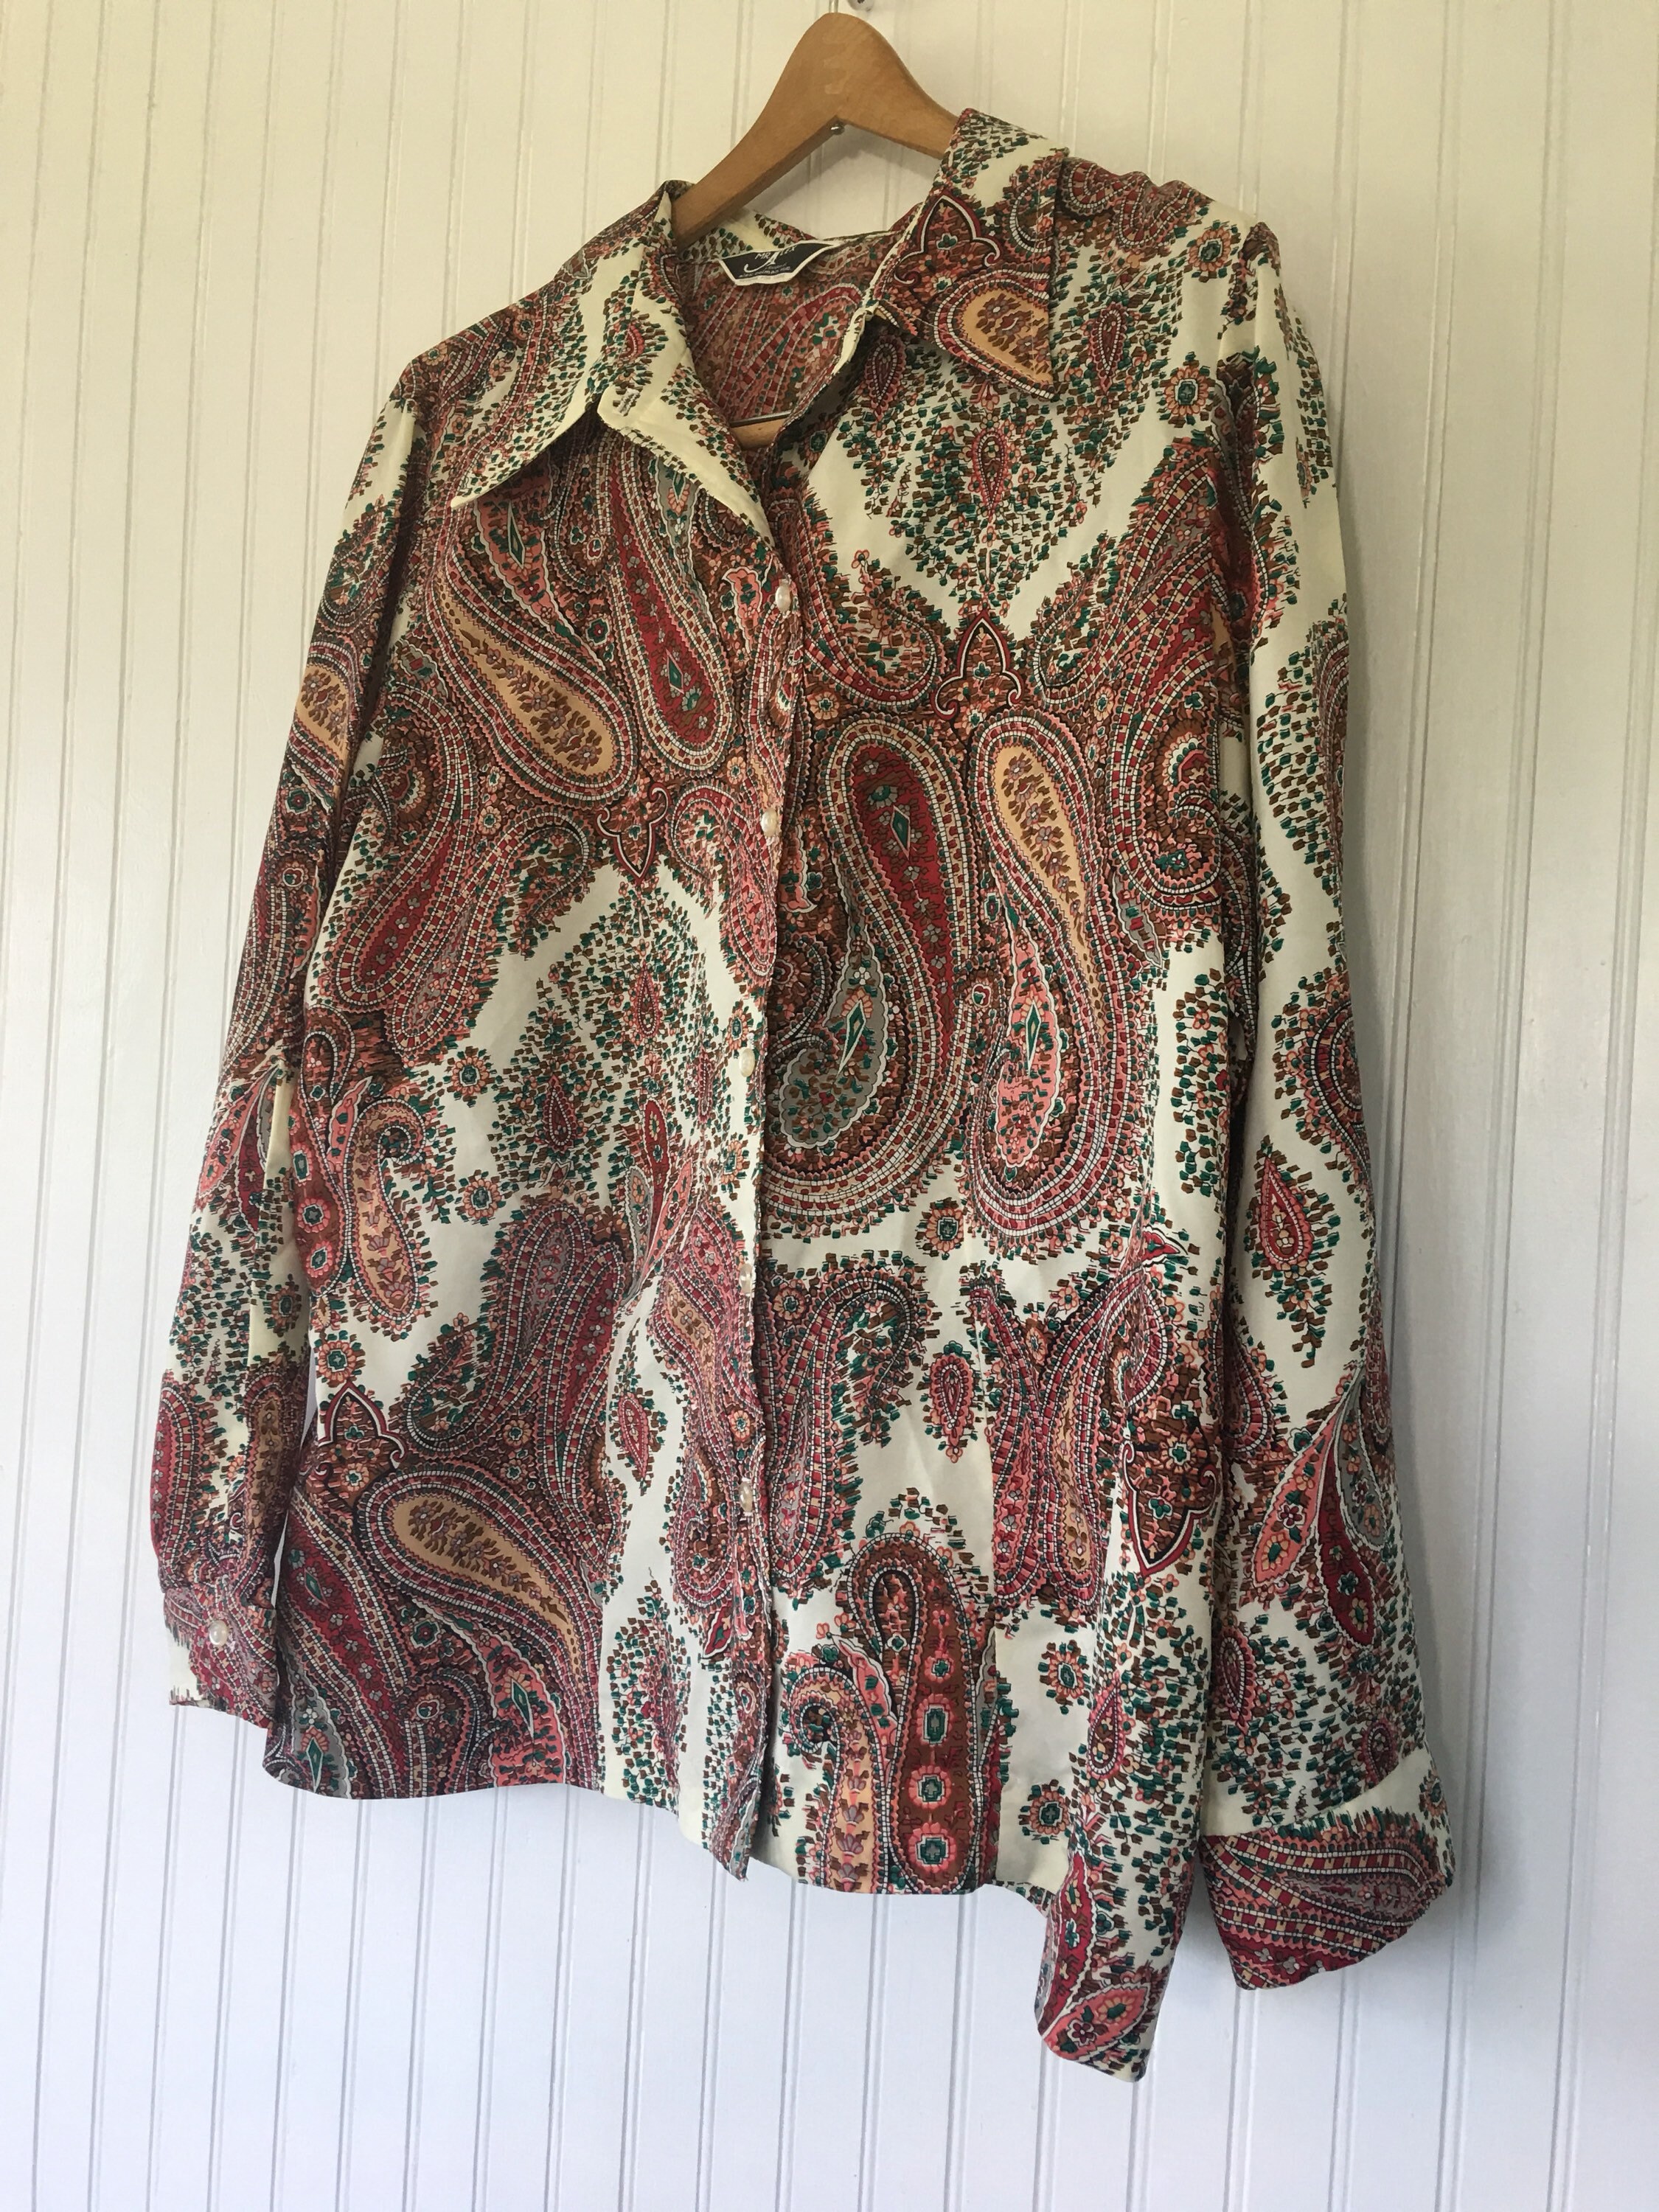 So Groovy Vintage 70's Paisley Pink Green Brown and White Blouse Shirt ...